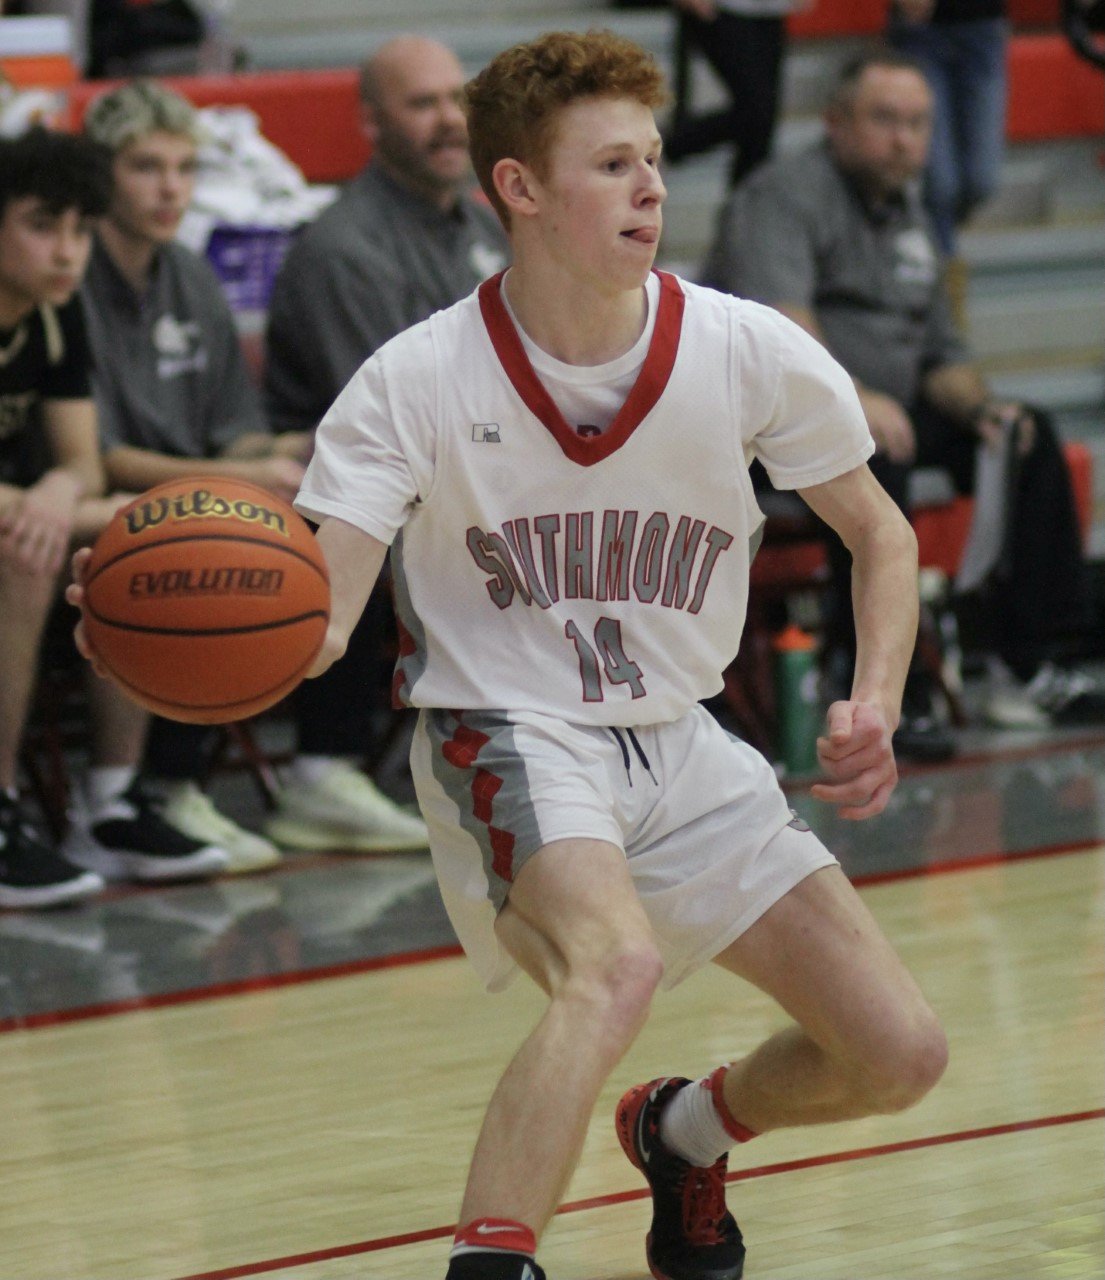 Southmont senior point guard Hayden Hess scored a career-high 20 points to help lead the Mounties to a season-opening county and conference win over North Montgomery 50-42.